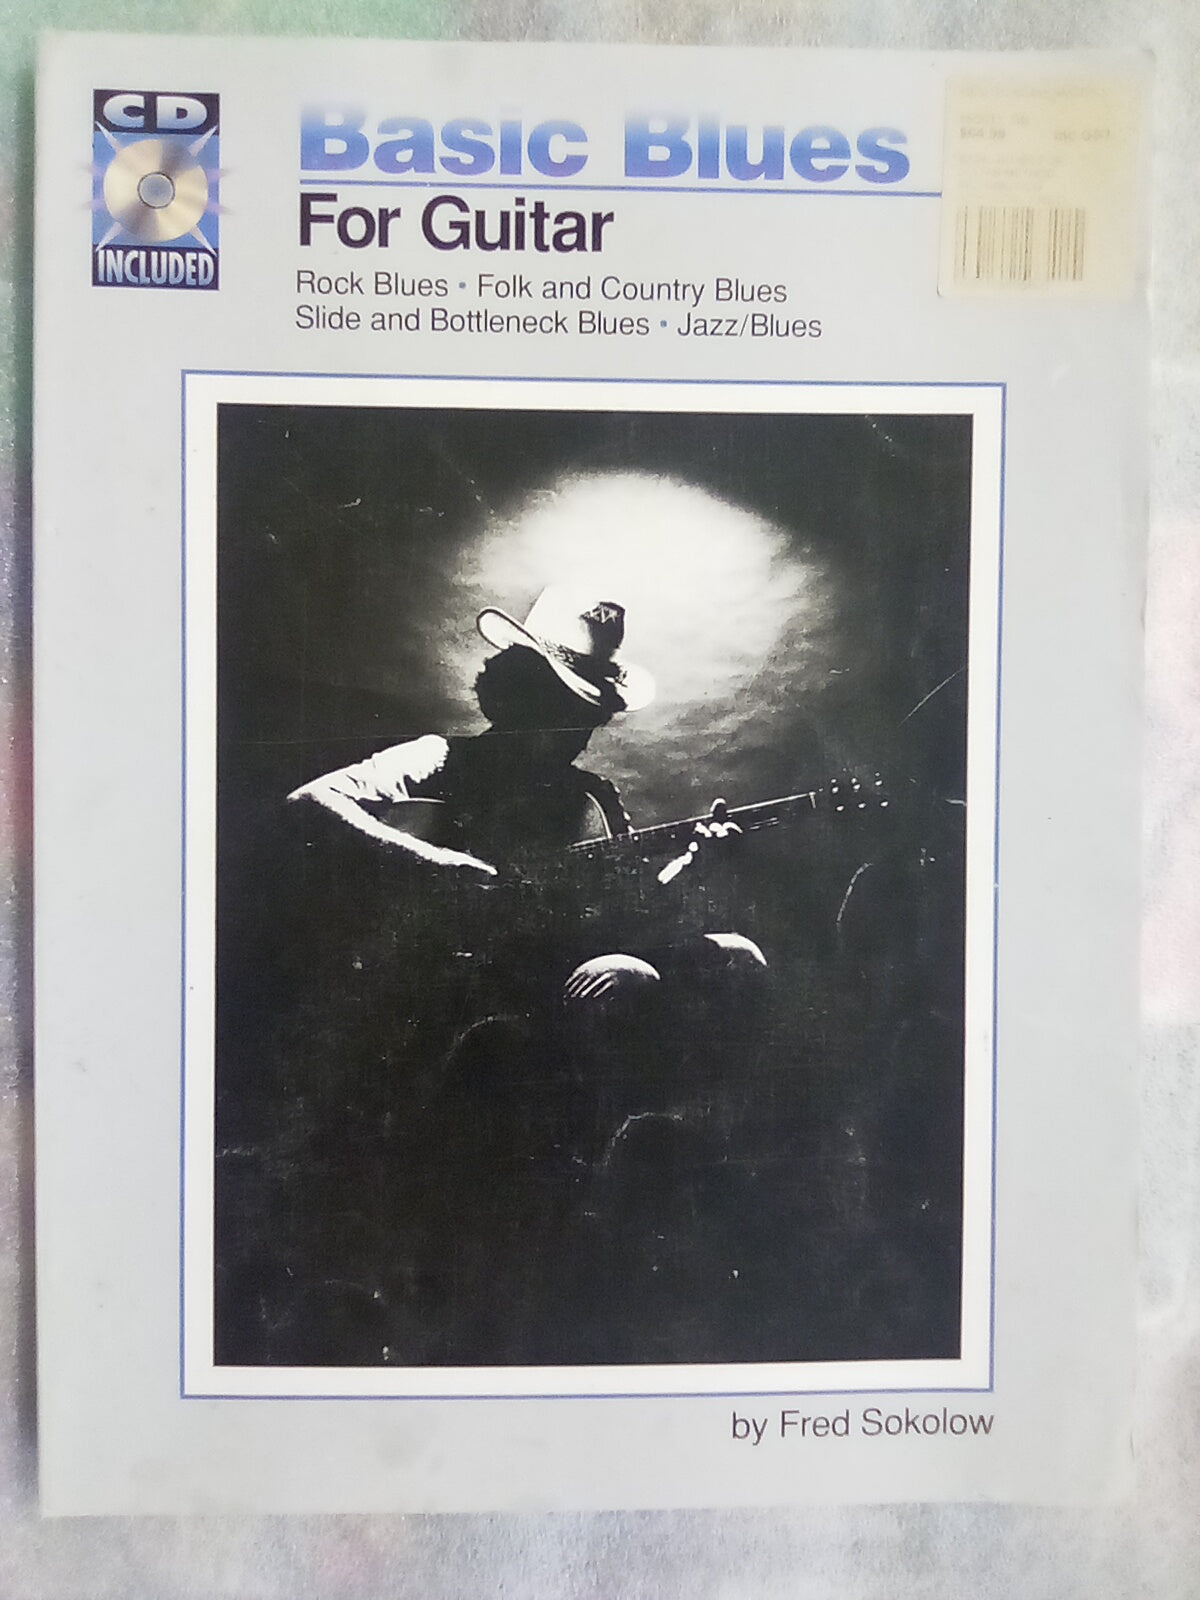 Basic Blues for Guitar by Fred Sokolow (Includes CD)